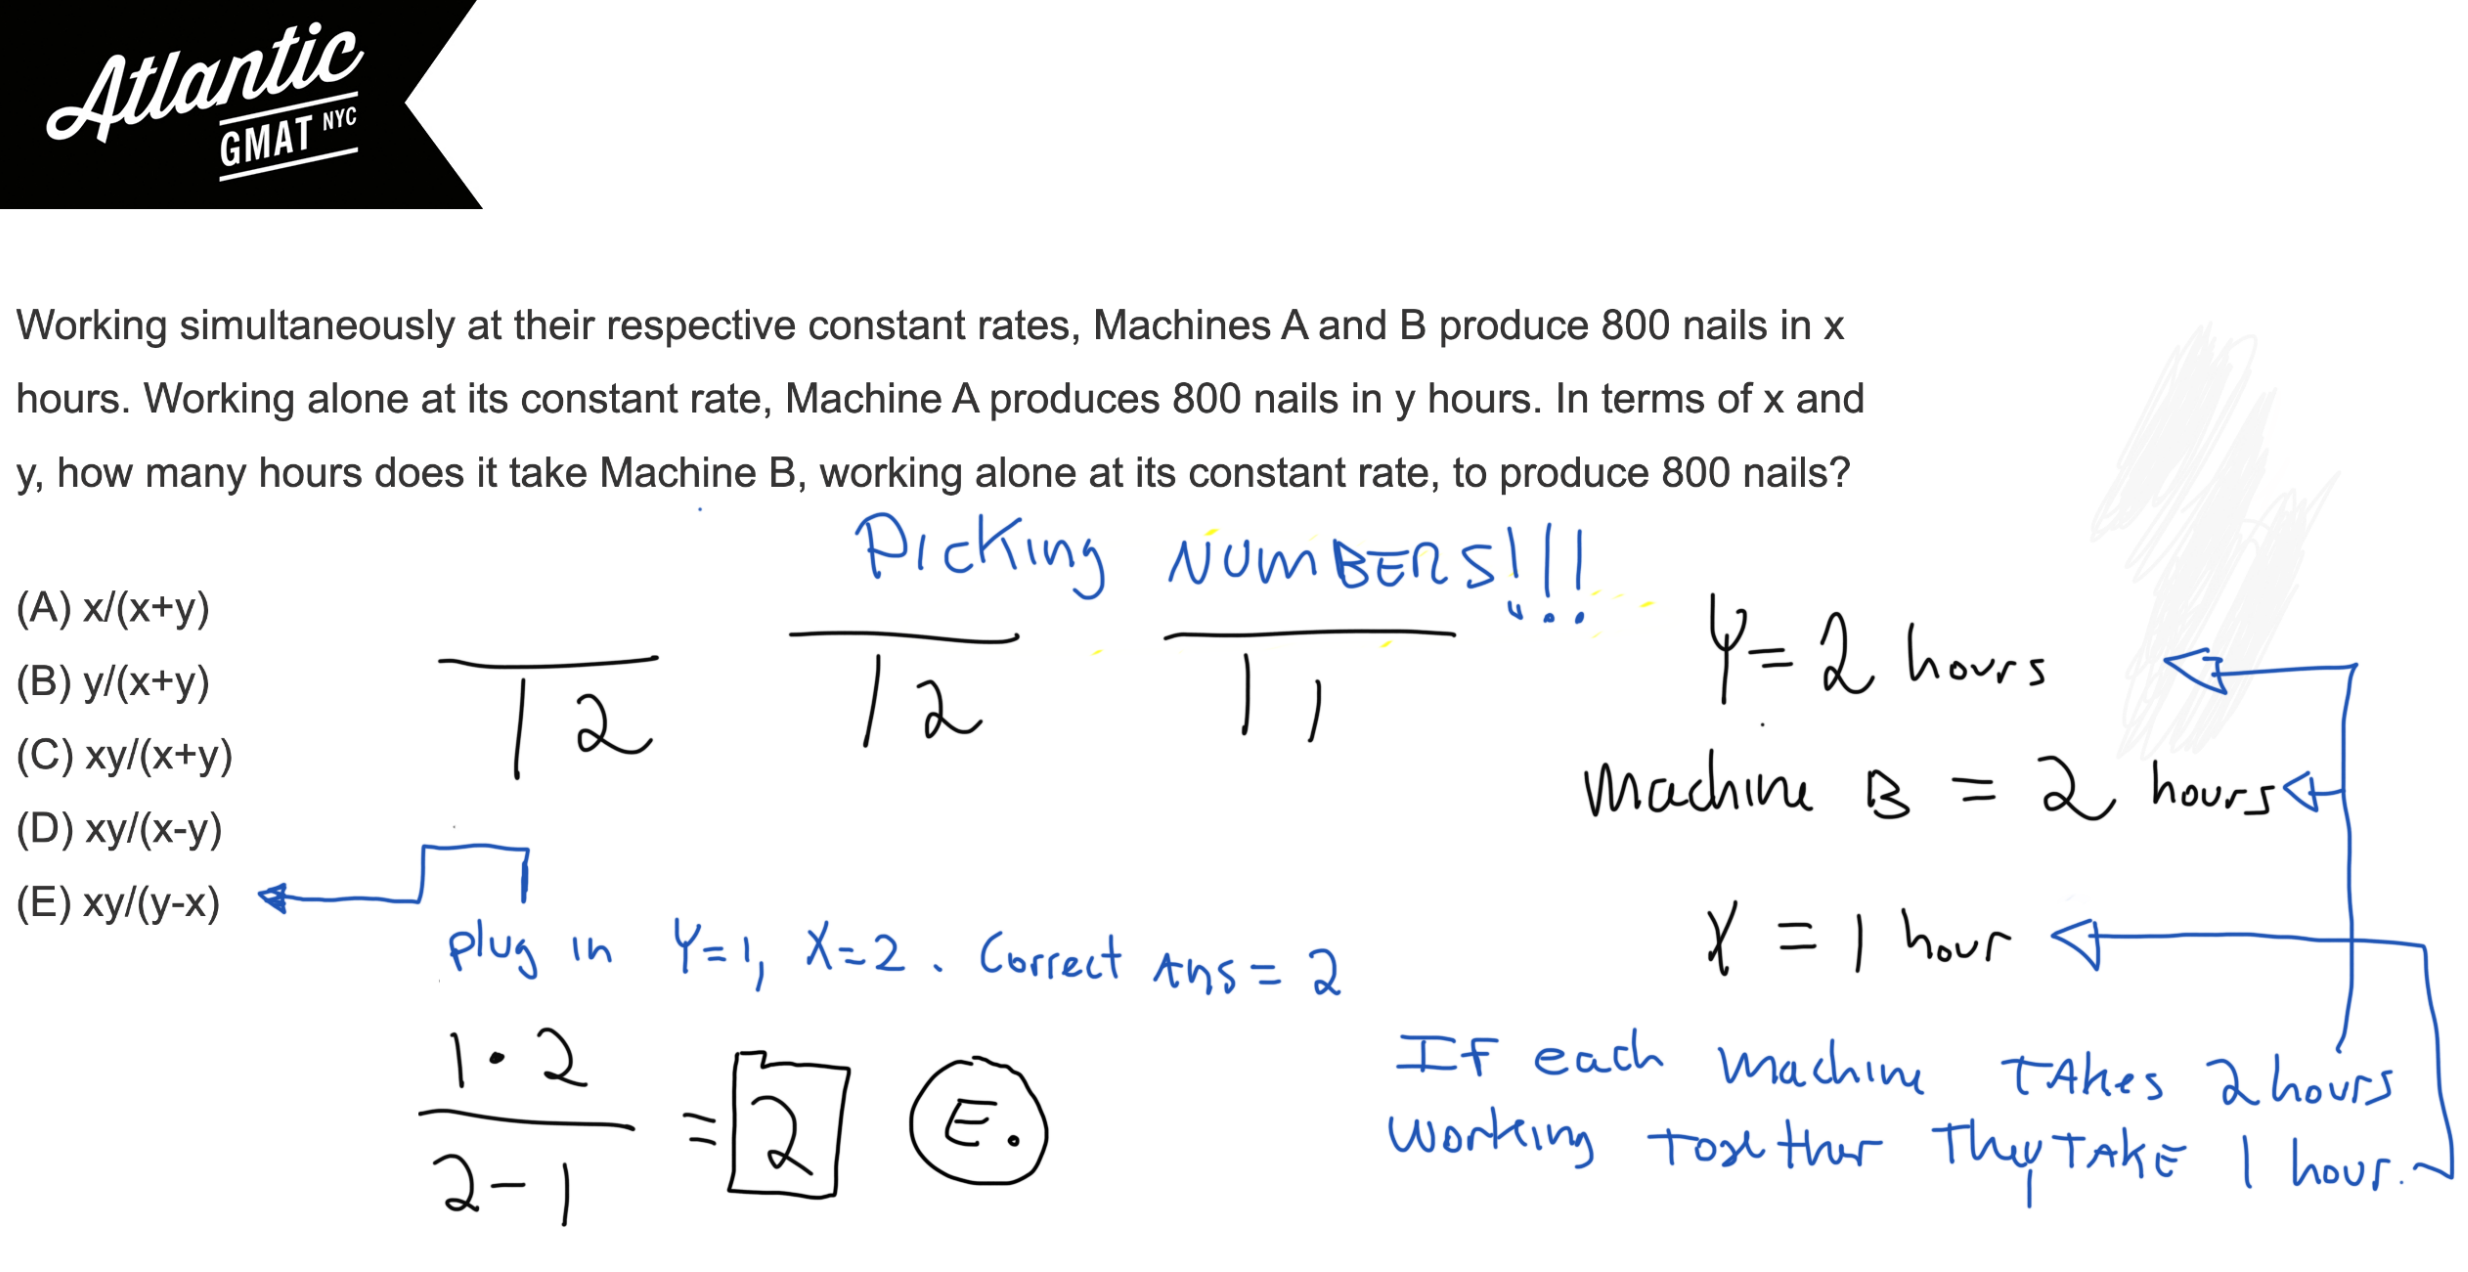 working simultaneously at their respective constant rates, machines a and b produce 800 nails gmat explanation picking numbers diagram